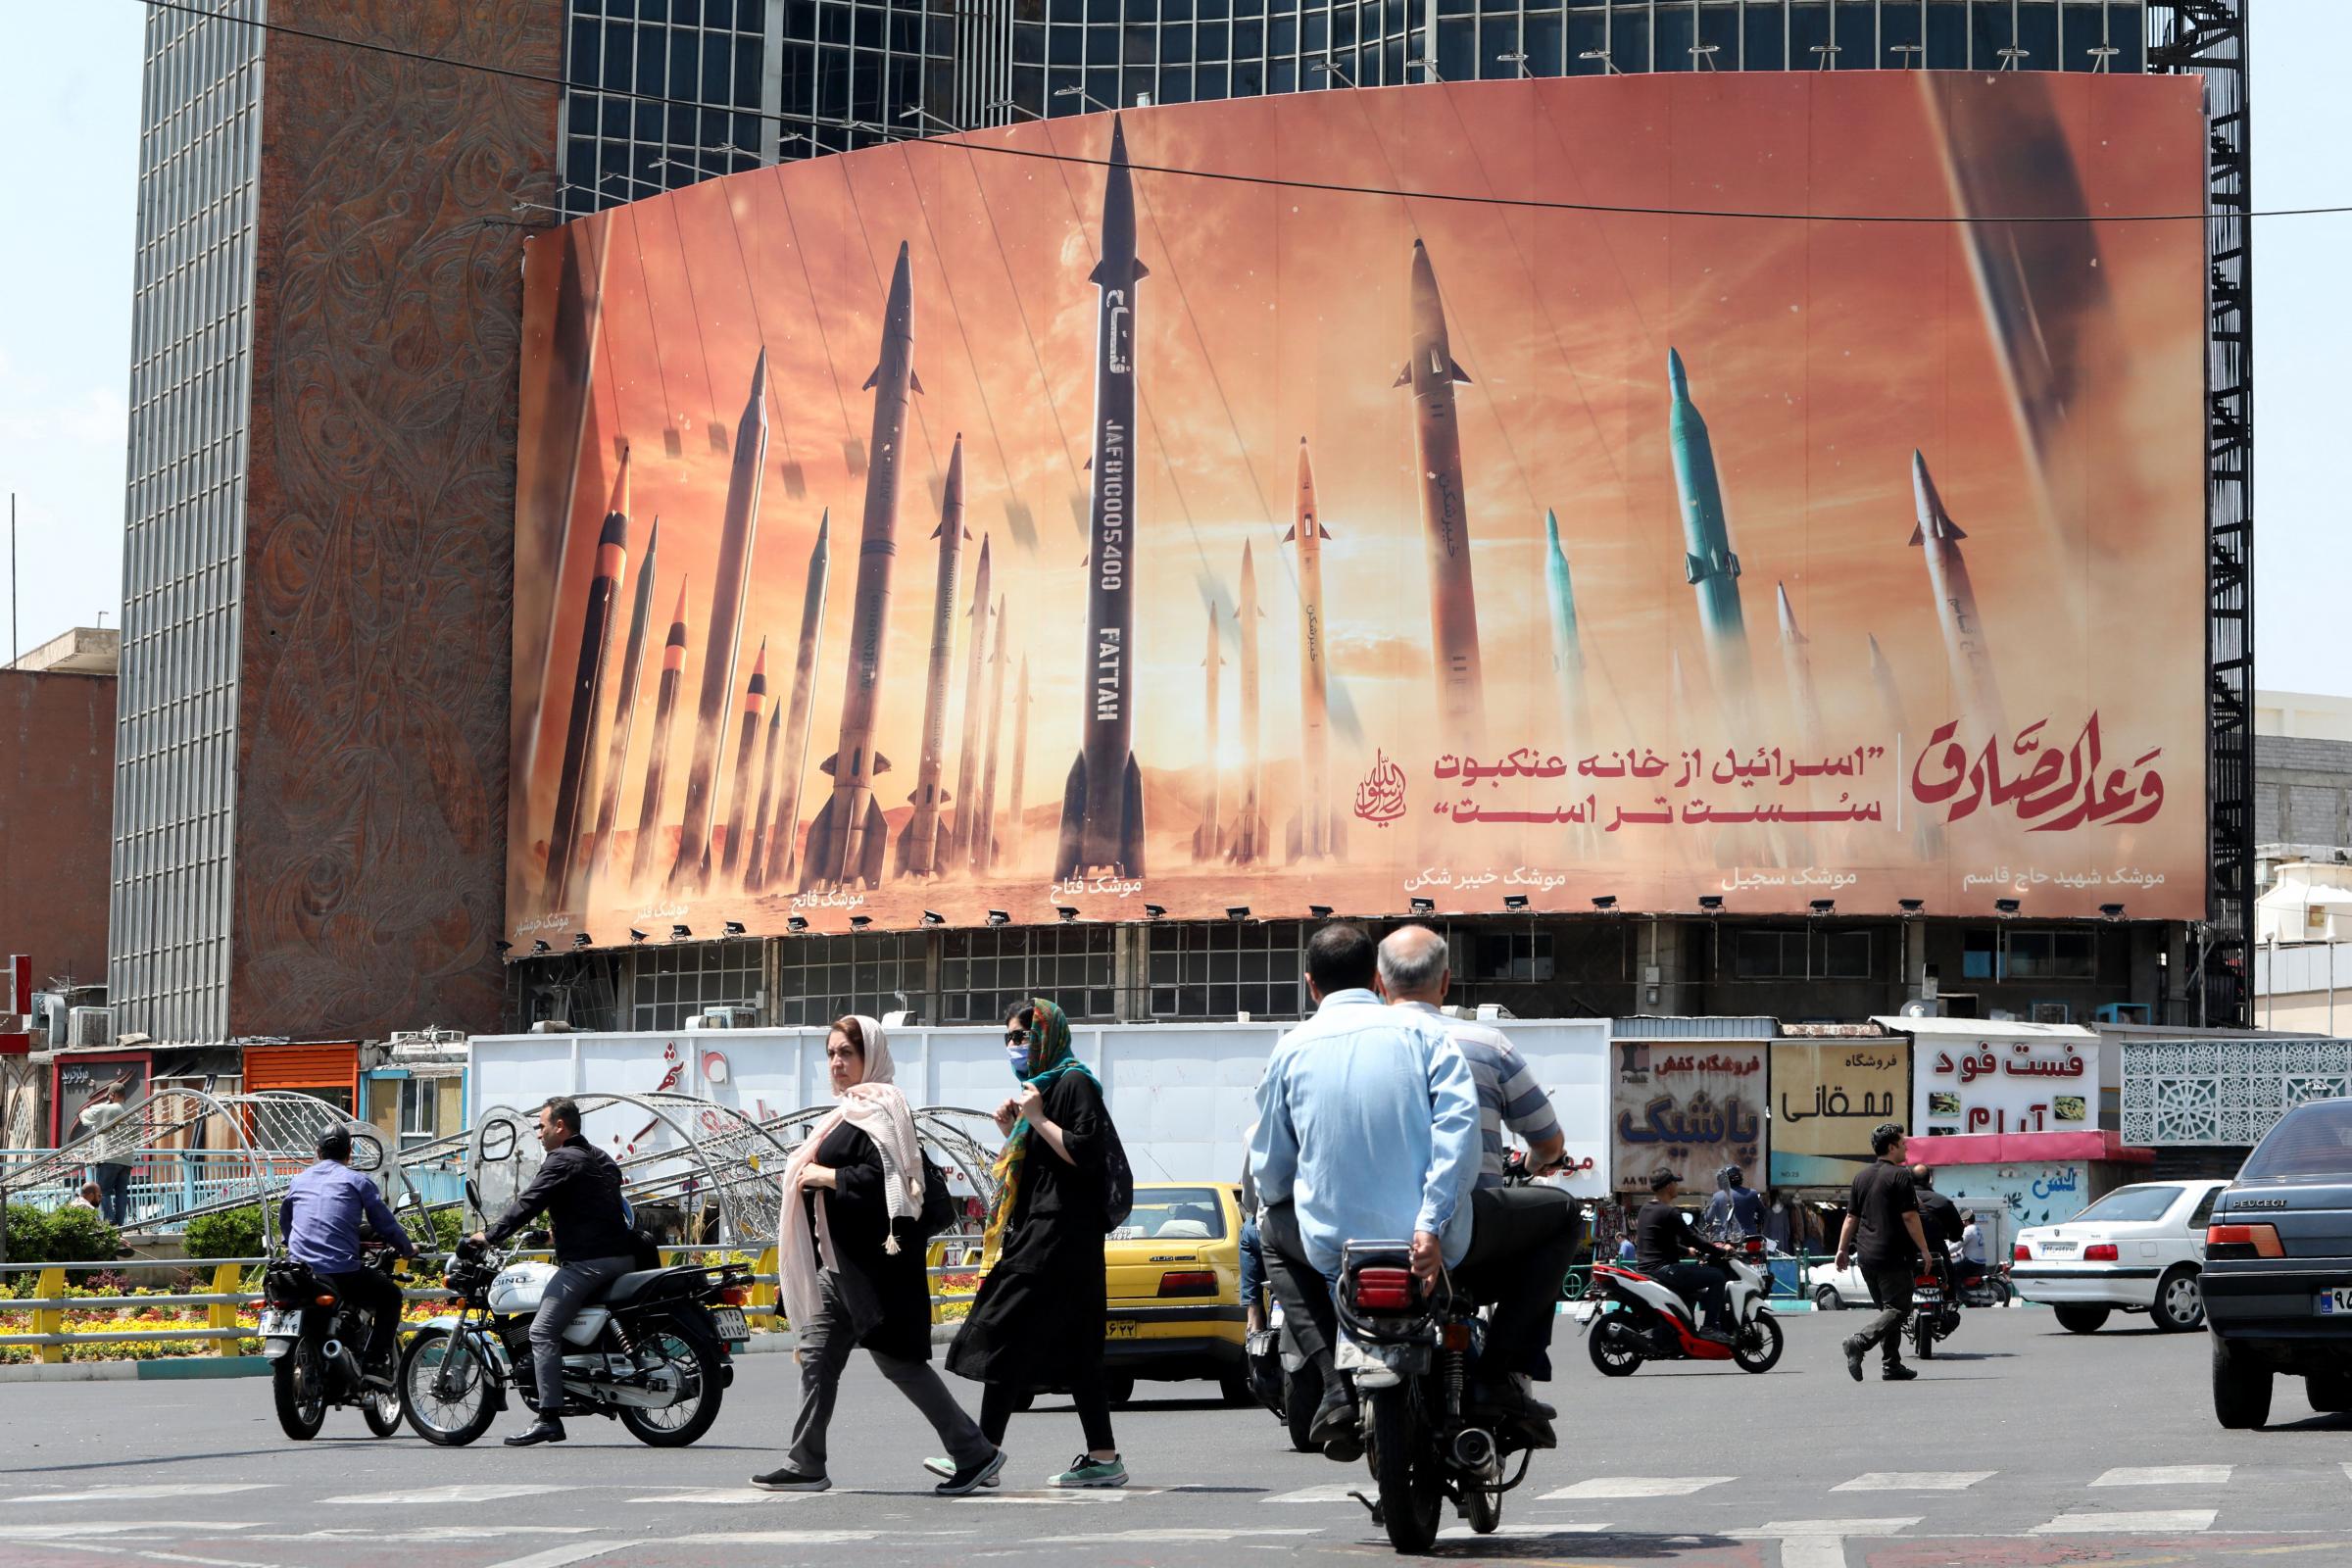 Motorists drive their vehicles past a billboard depicting Iranian missiles in Tehran on April 20, 2024, a day after Irans state media reported explosions in the central province of Isfahan. (Photo by ATTA KENARE / AFP) (Photo by ATTA KENARE/AFP via